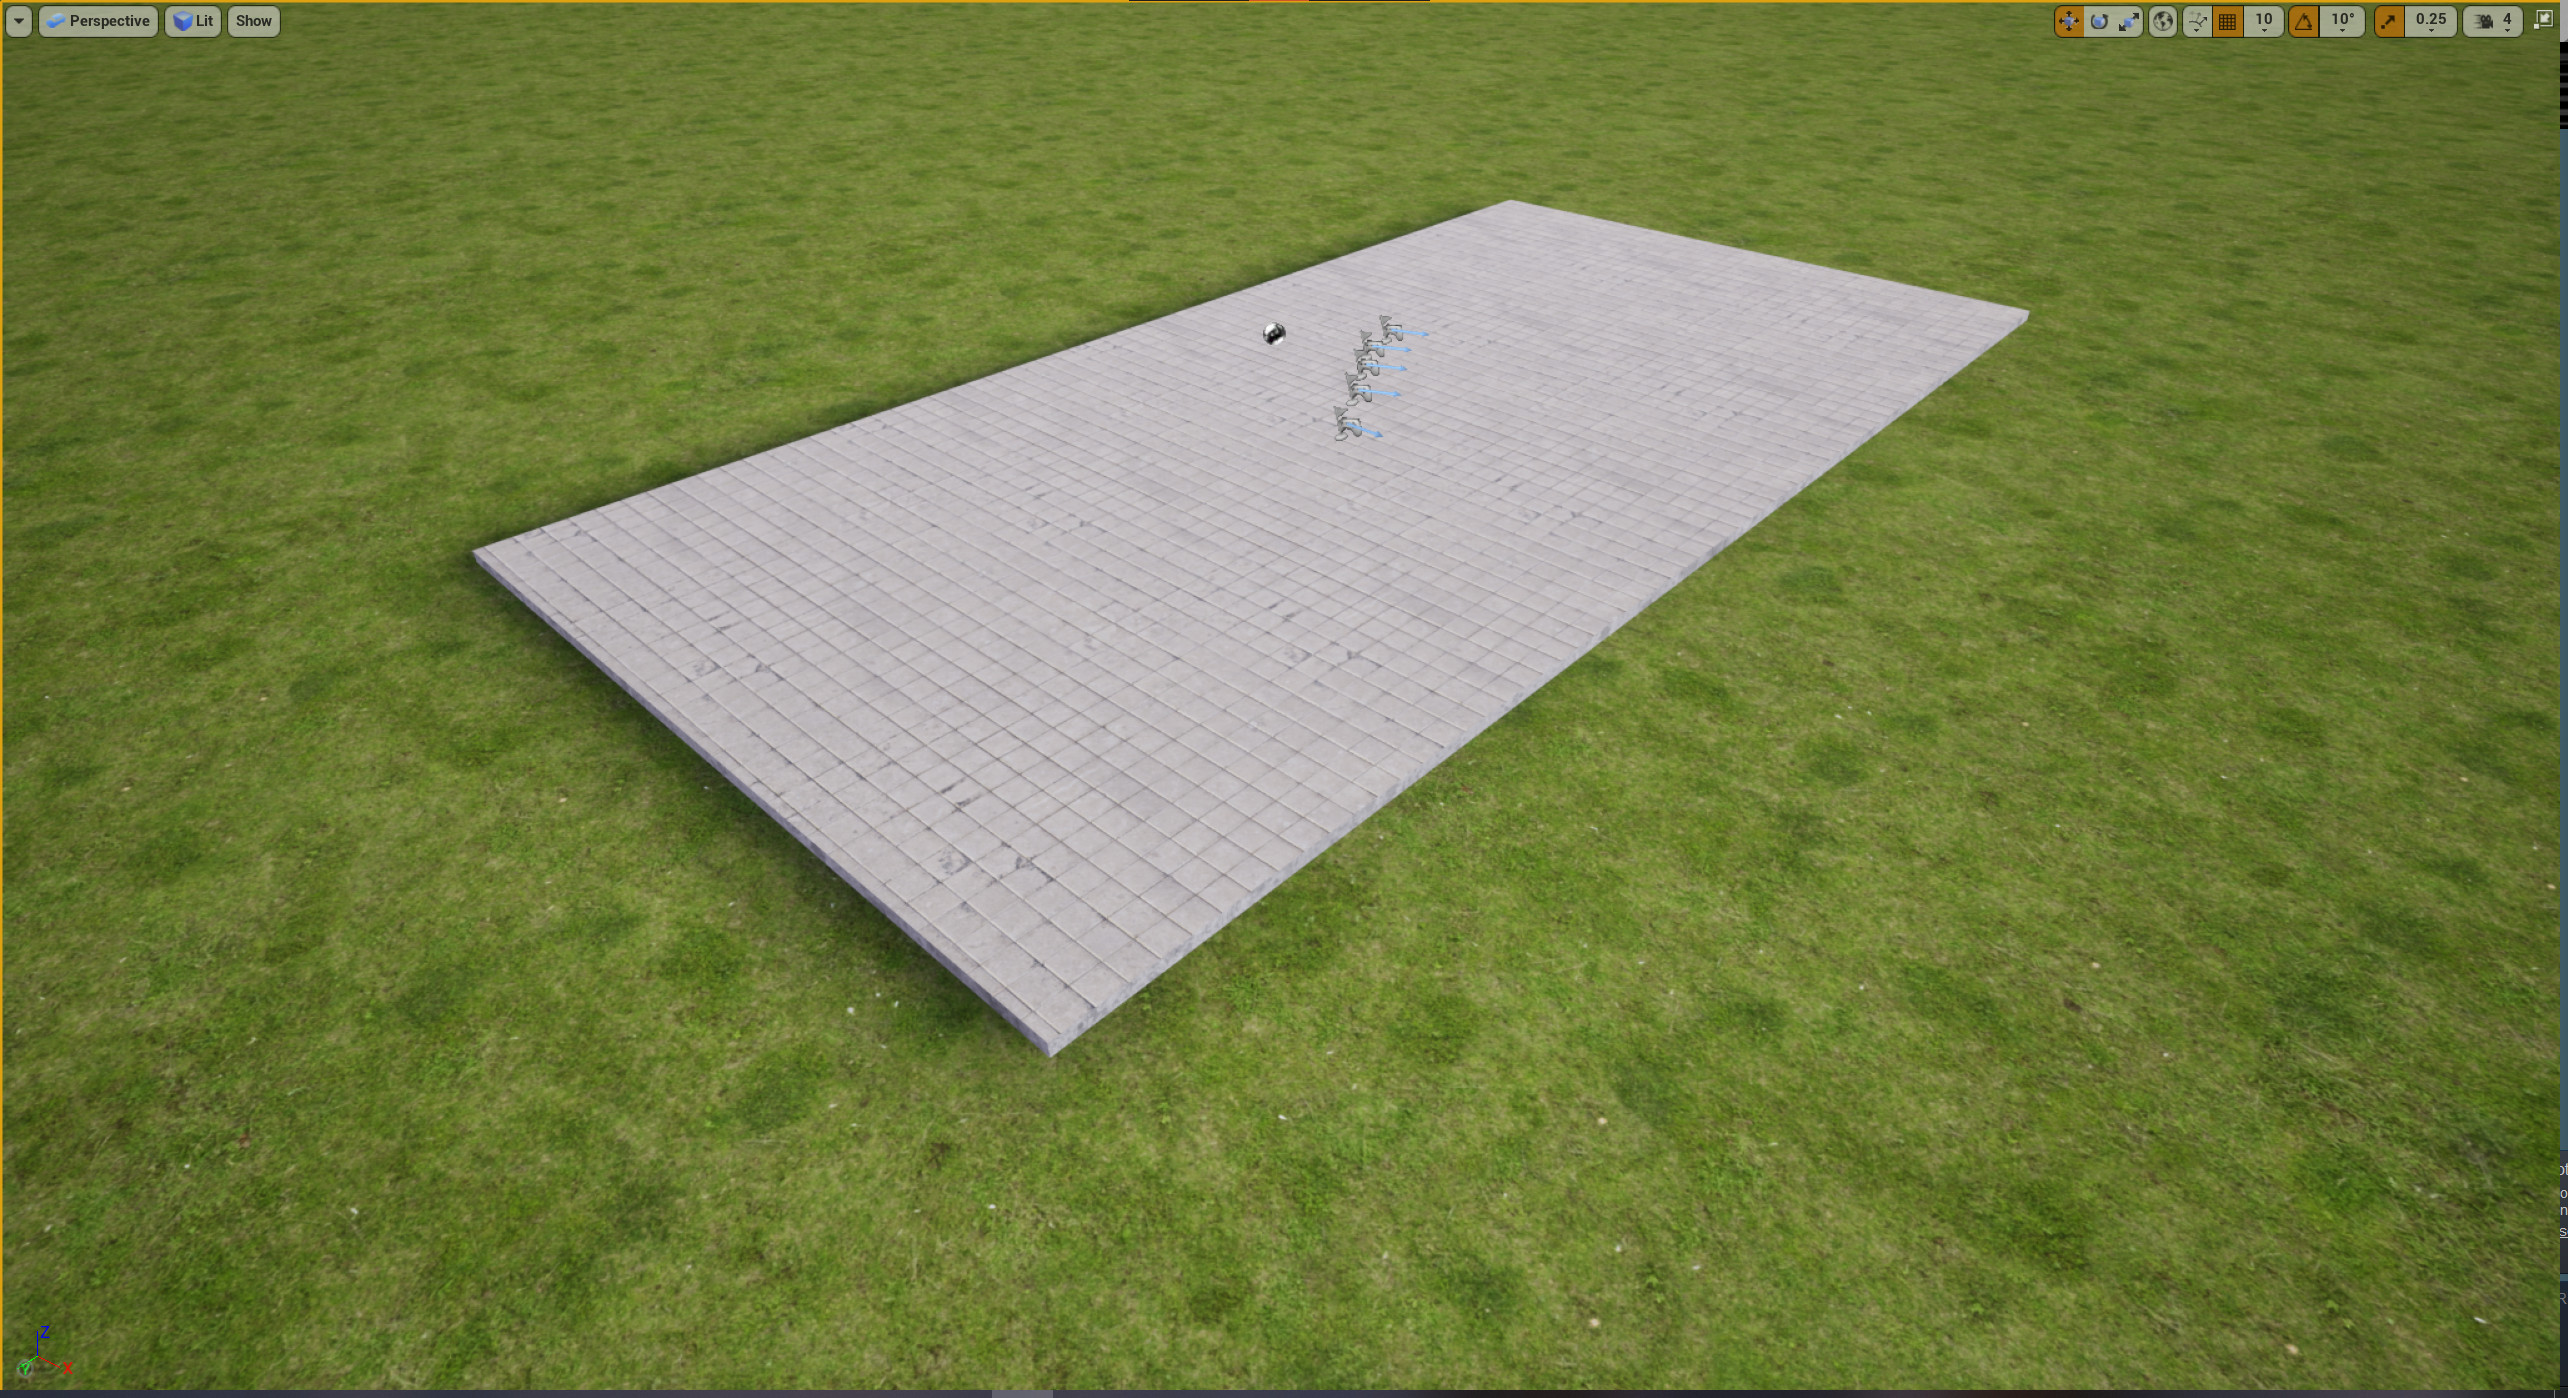 Made the tiling less noticeable by creating a material function that distorts the UV layout and added a macro texture. 